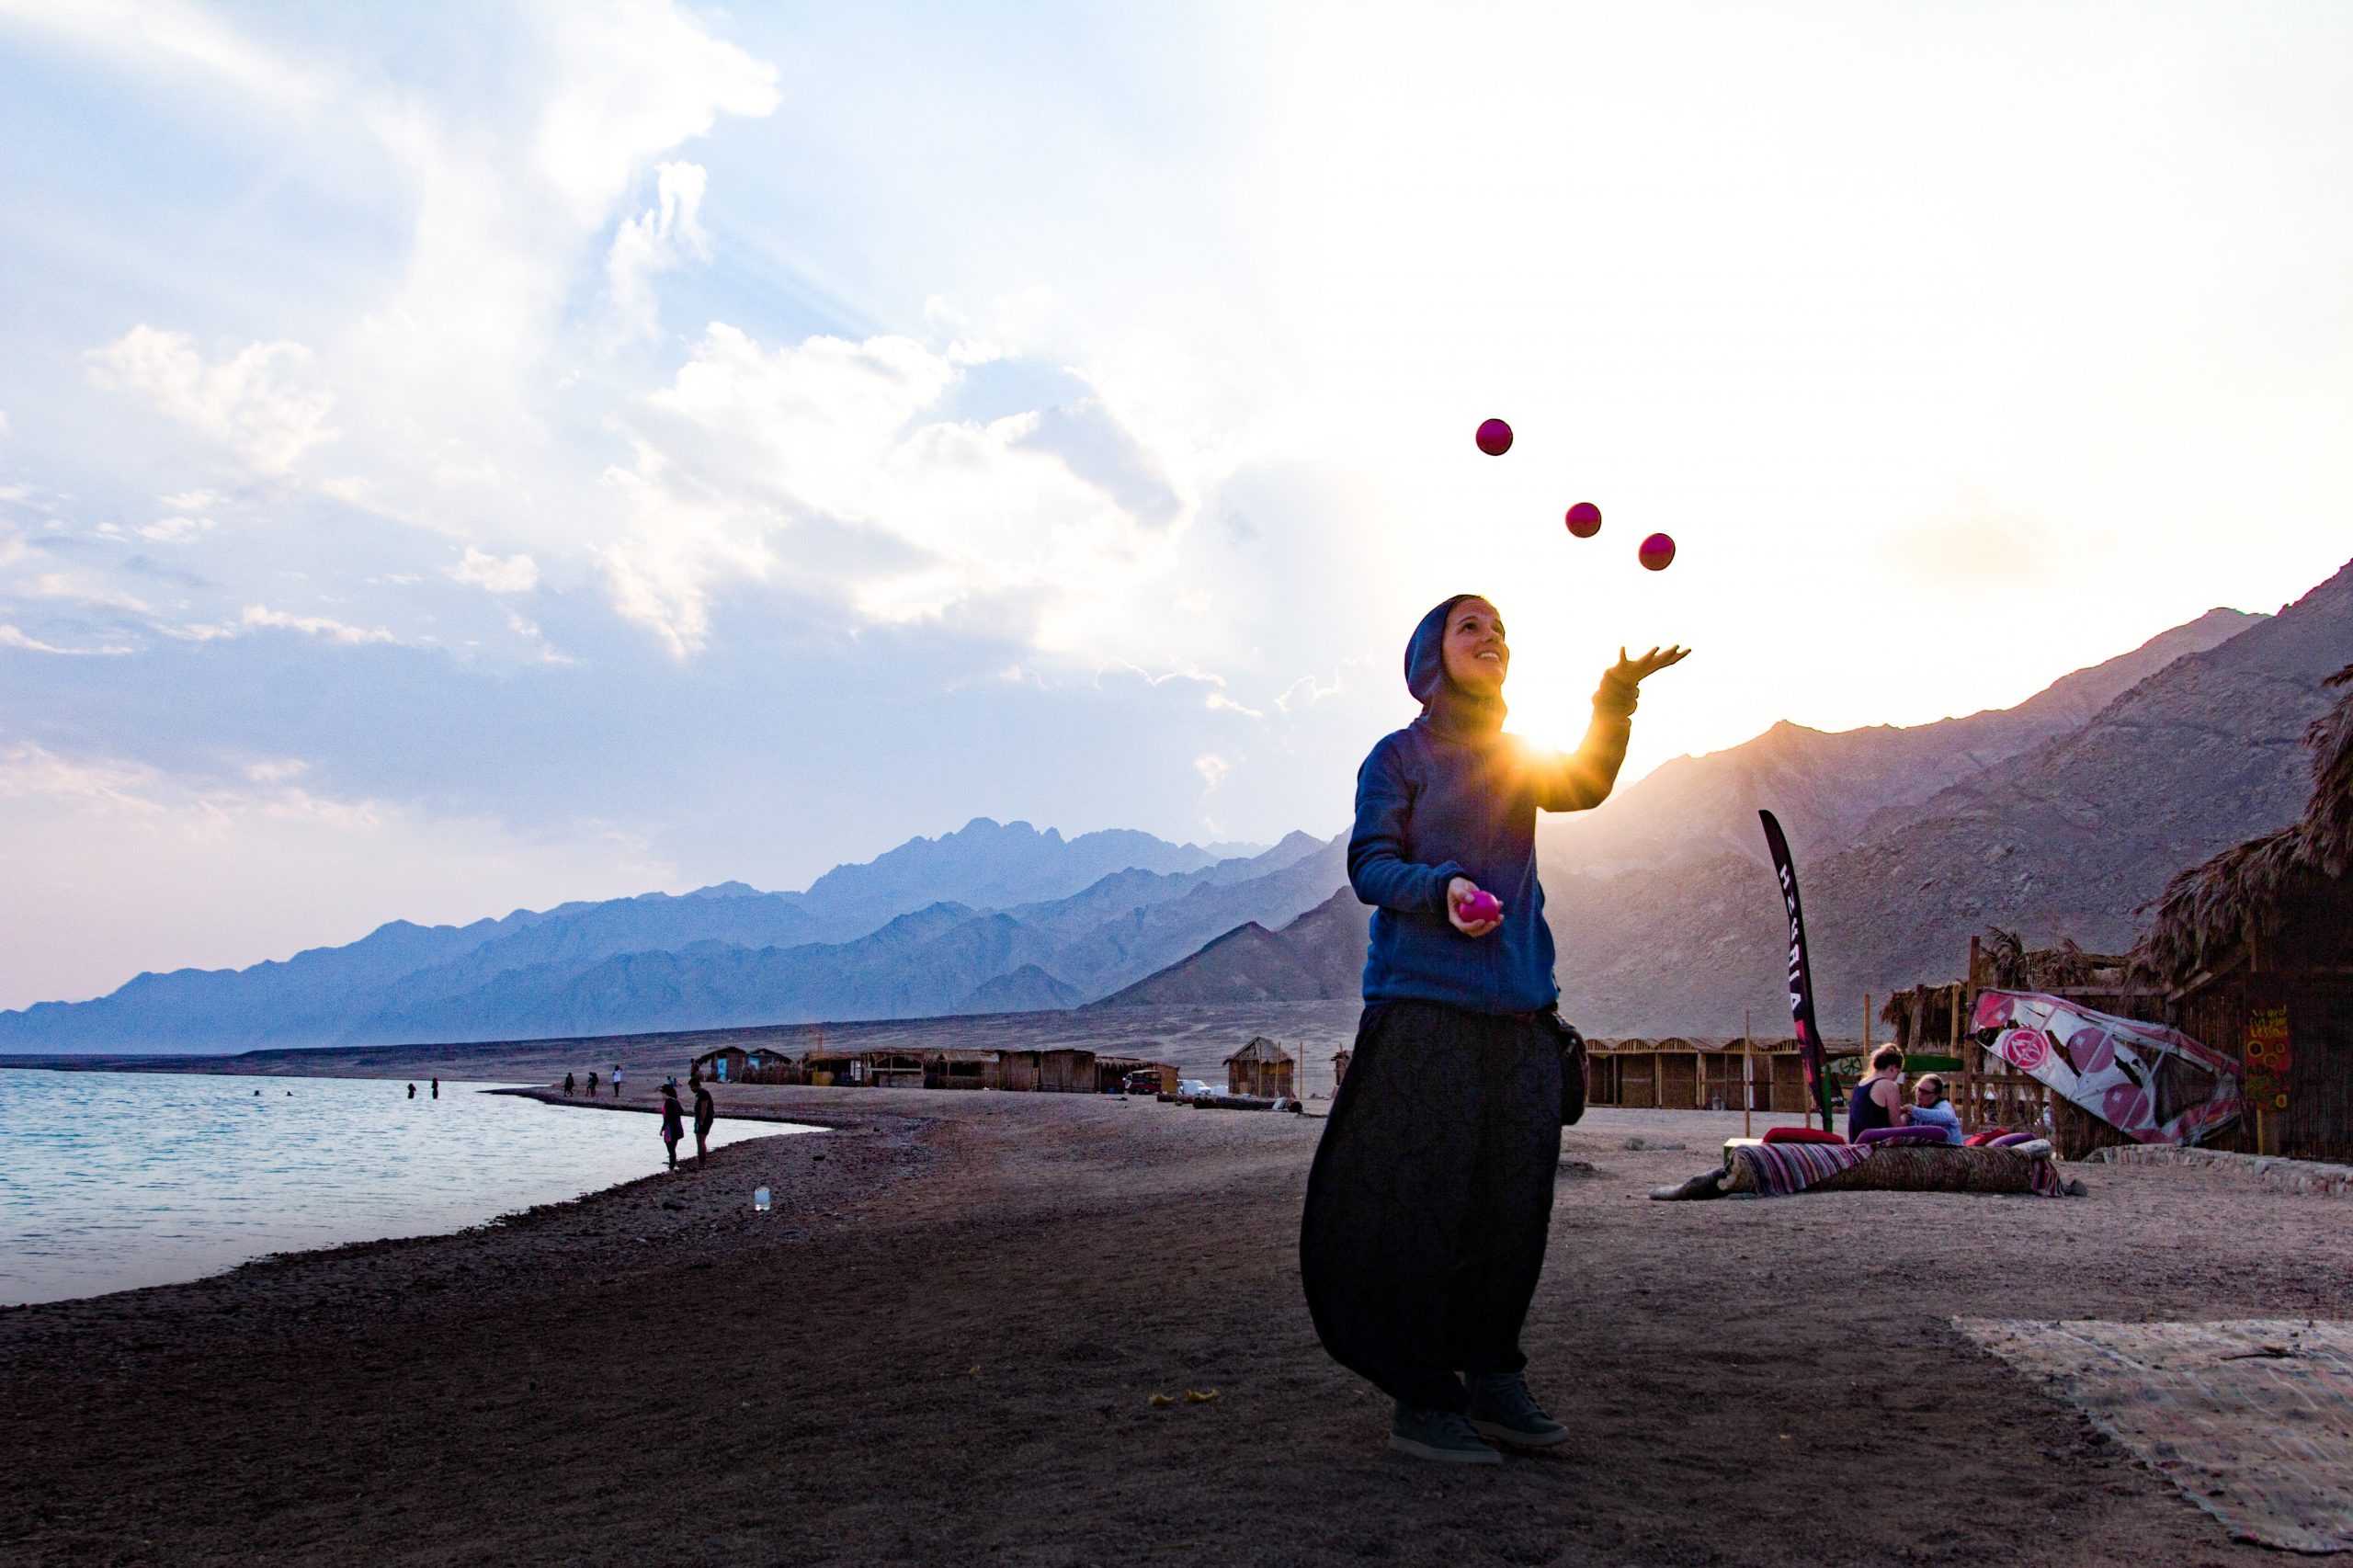 Picture of a woman juggling on a beach